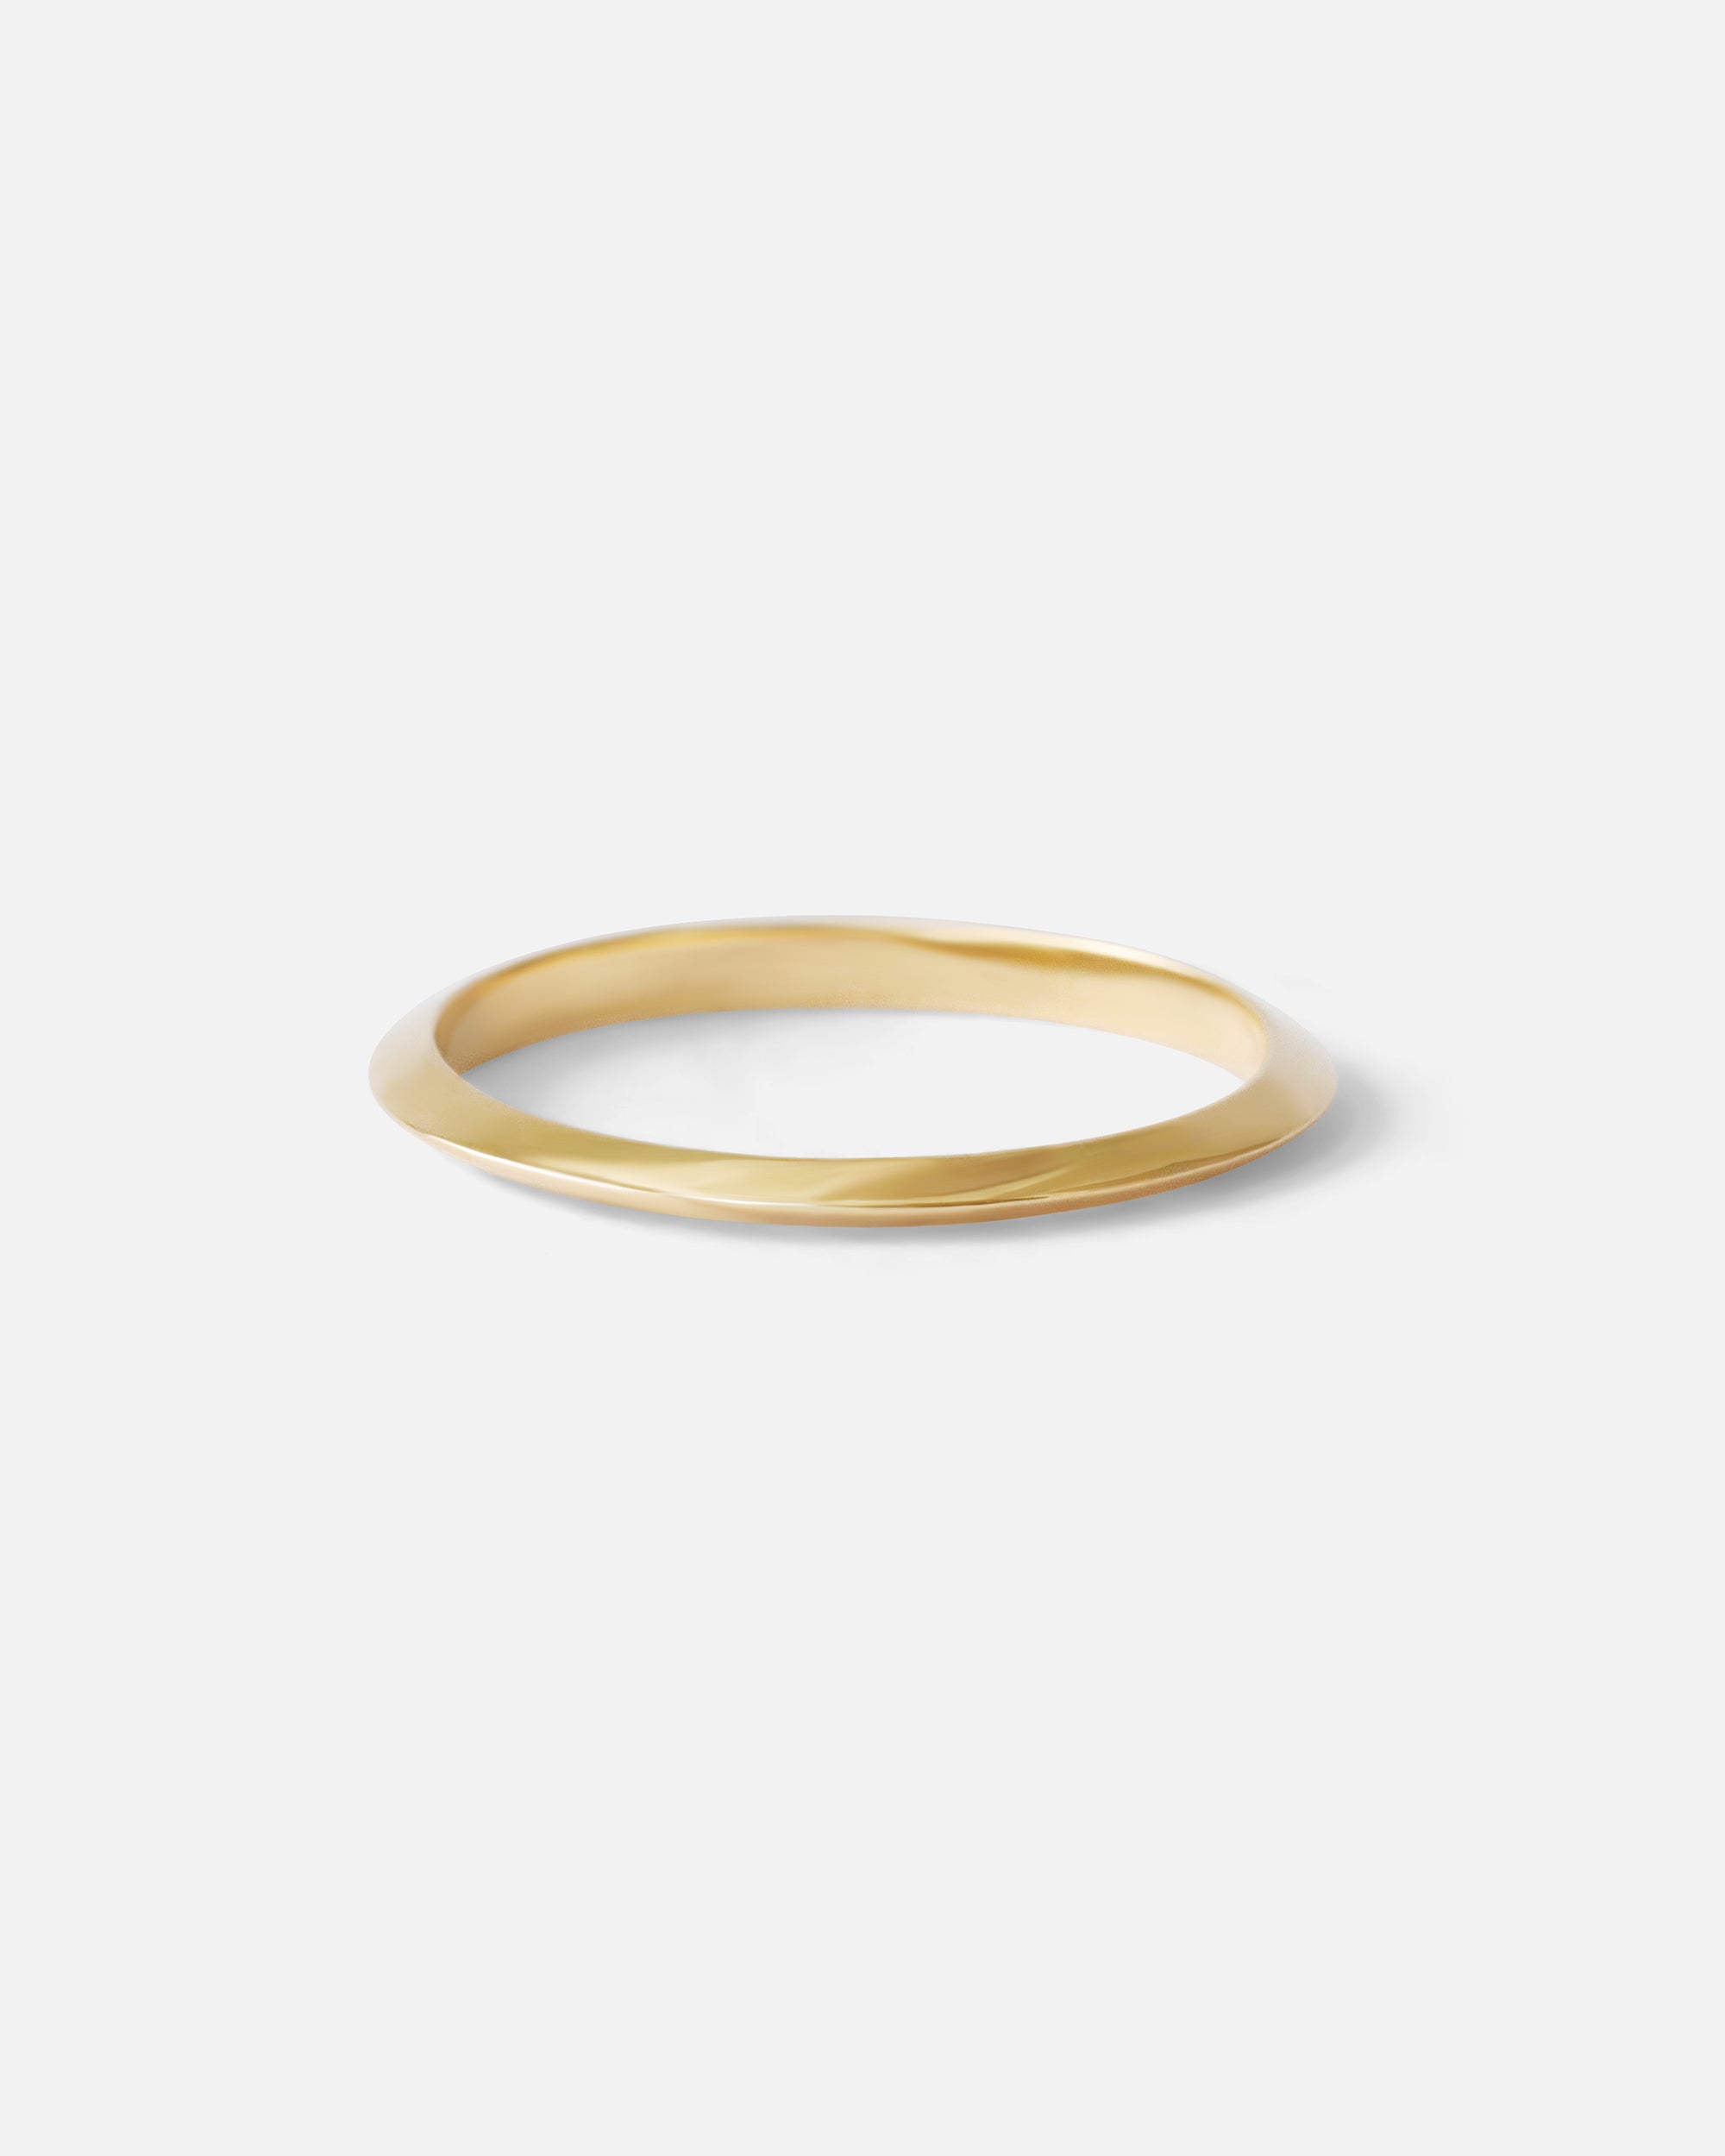 Floe Band / Classic By Casual Seance in Wedding Bands Category